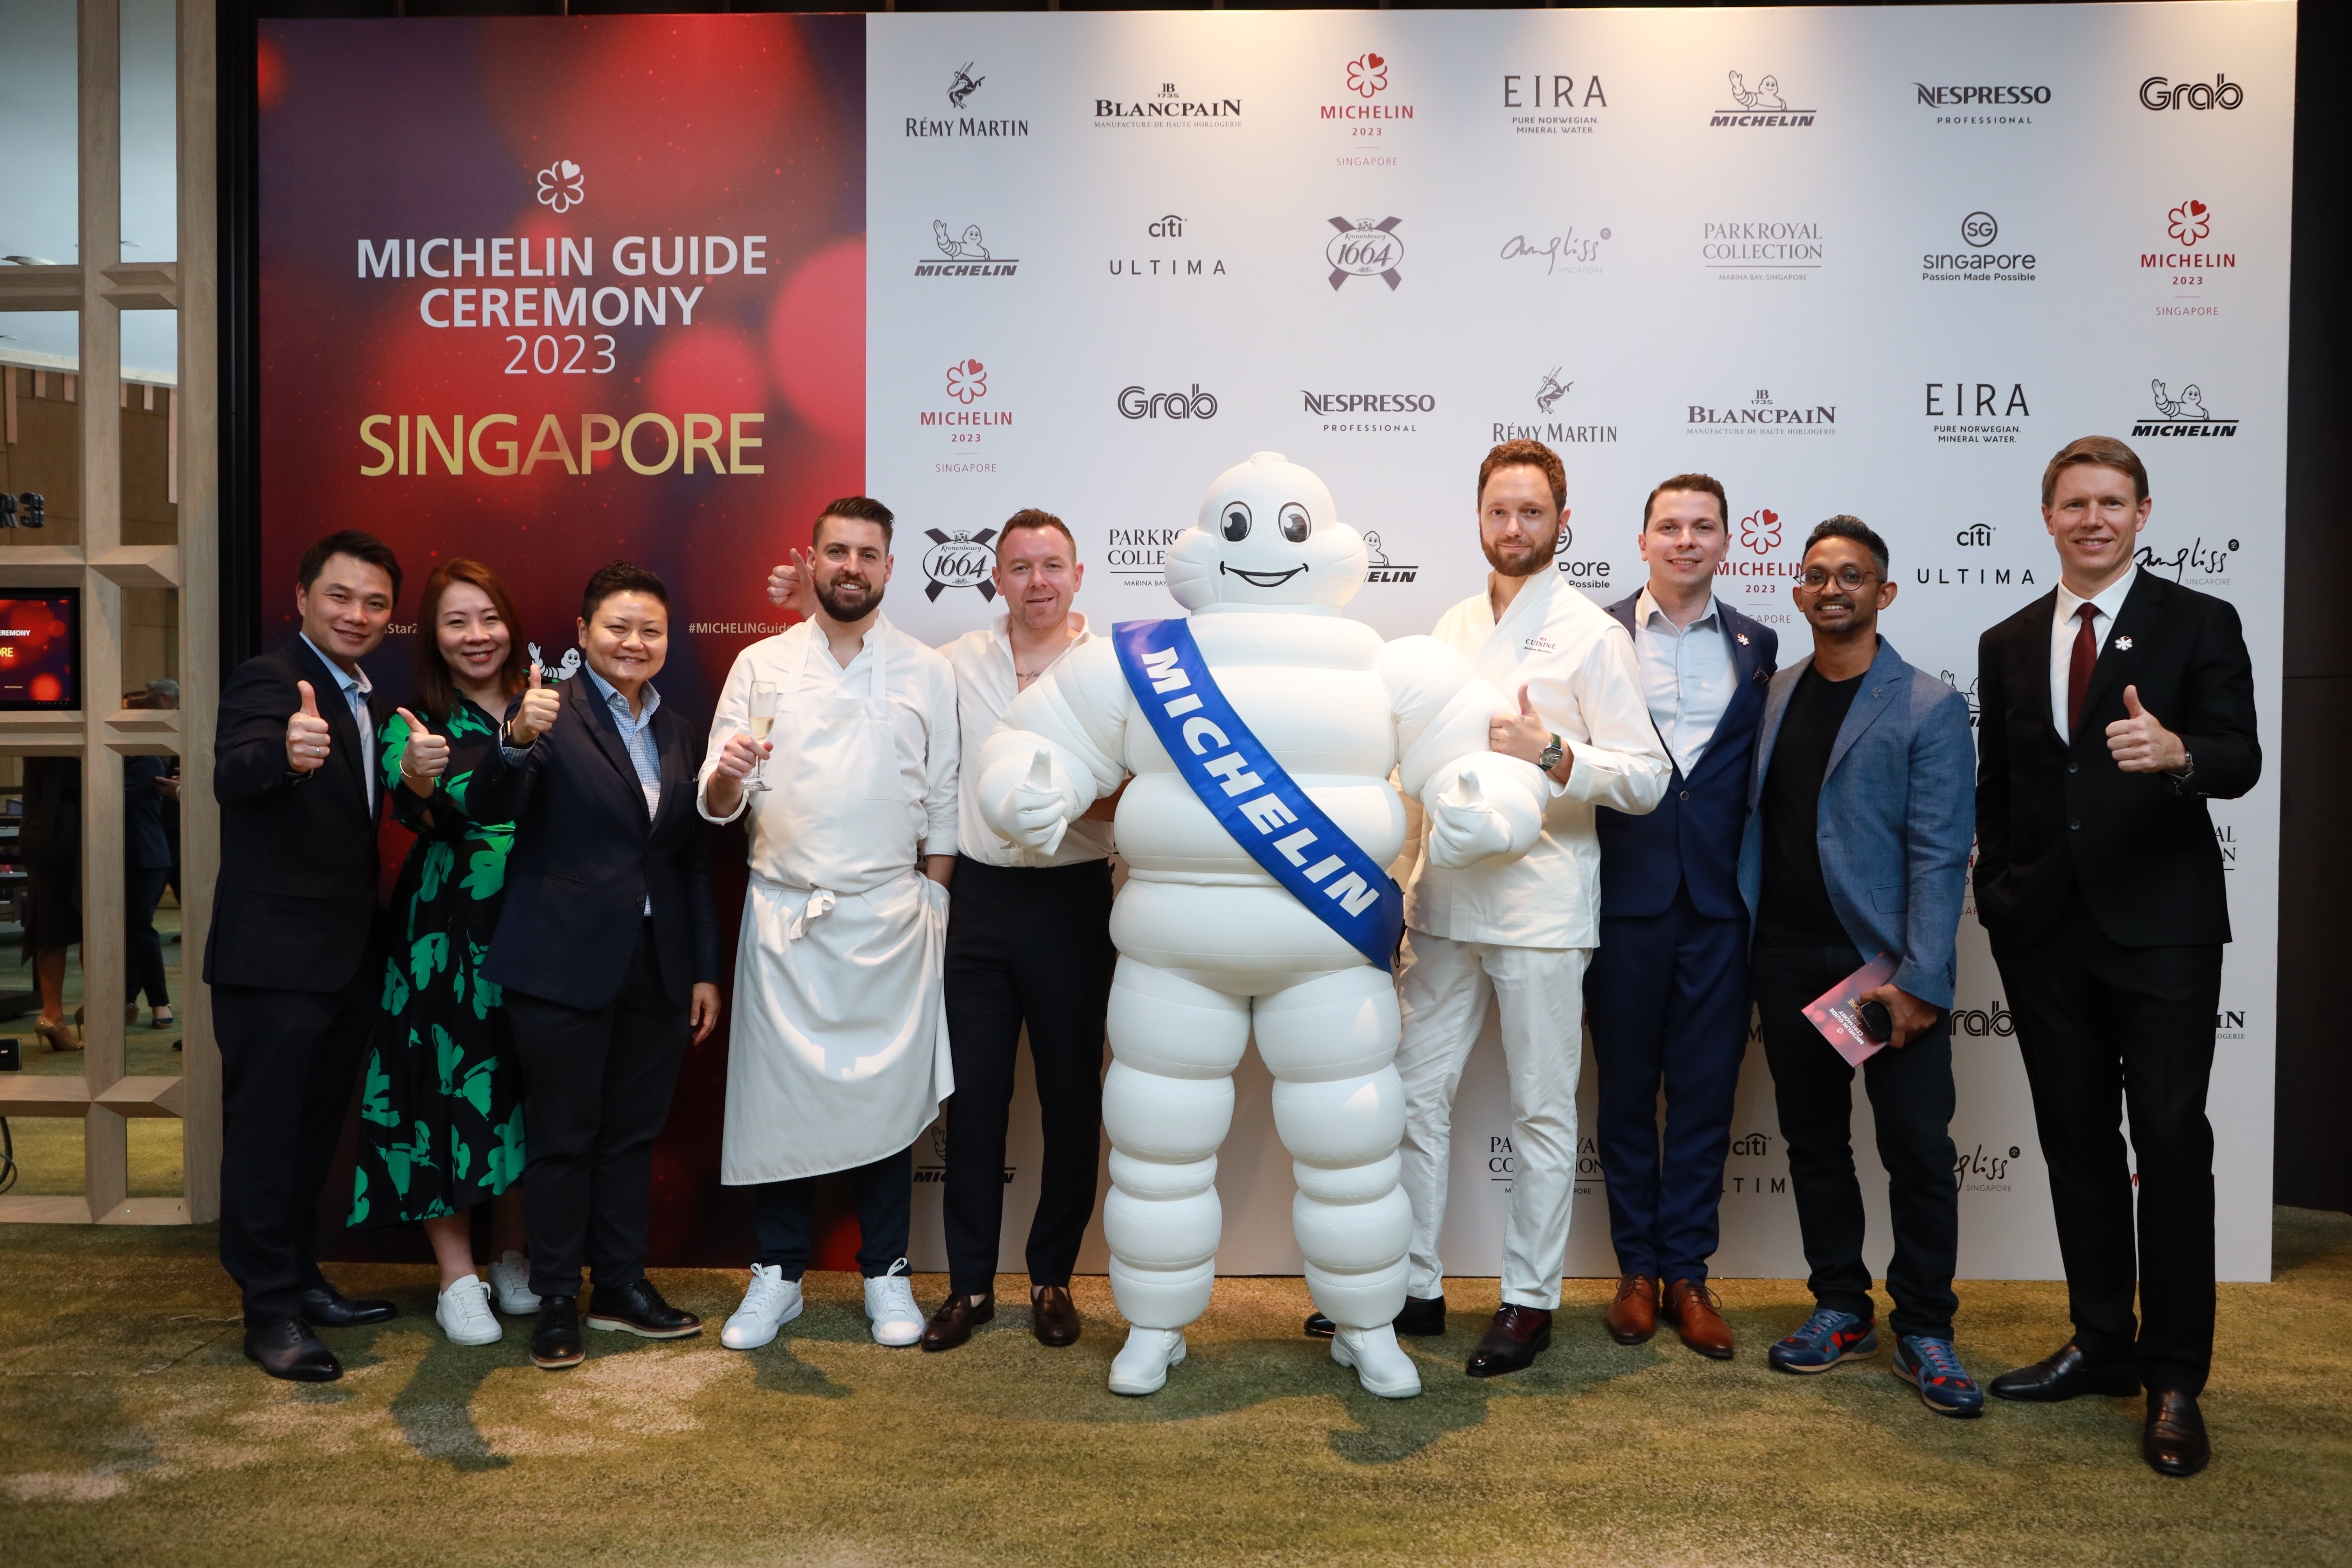 From left to right: Mr Ng Kwee Song, Head of Card Products, Citibank Singapore; Ms Karen Seet, Head of Affluent Card Products, Citibank Singapore; Ms Regina Lim, Head of Cards and Personal Loans, Citibank Singapore; Executive Chef Mr Kirk Westaway, Jaan; Chef-Owner Mr Andrew Walsh, Cure; Bibendum; Chef-Owner Mr Mathieu Escoffier, Ma Cuisine; Chef-Owner Mr Daniele Sperindio, Art di Daniele Sperindio; Chef-Owner Mr Rishi Naleendra, Cloudstreet; Mr Chris Gledhill, Vice President of Business Development & Partnerships, the MICHELIN Guide East Asia, Australia & Middle East